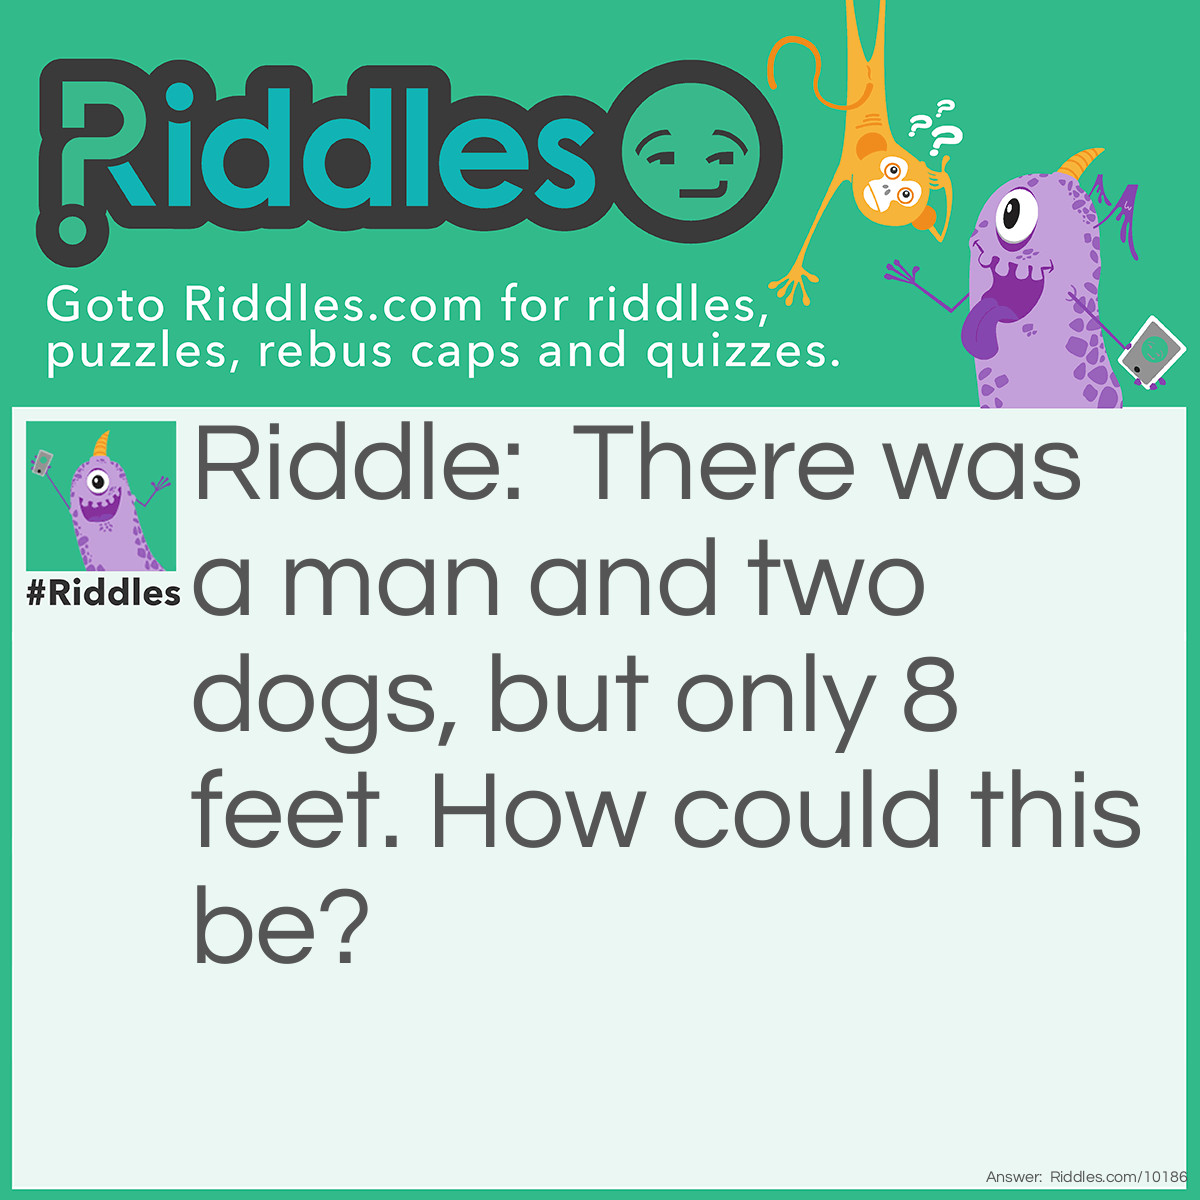 Riddle: There was a man and two dogs, but only 8 feet. How could this be? Answer: The man was defooted.